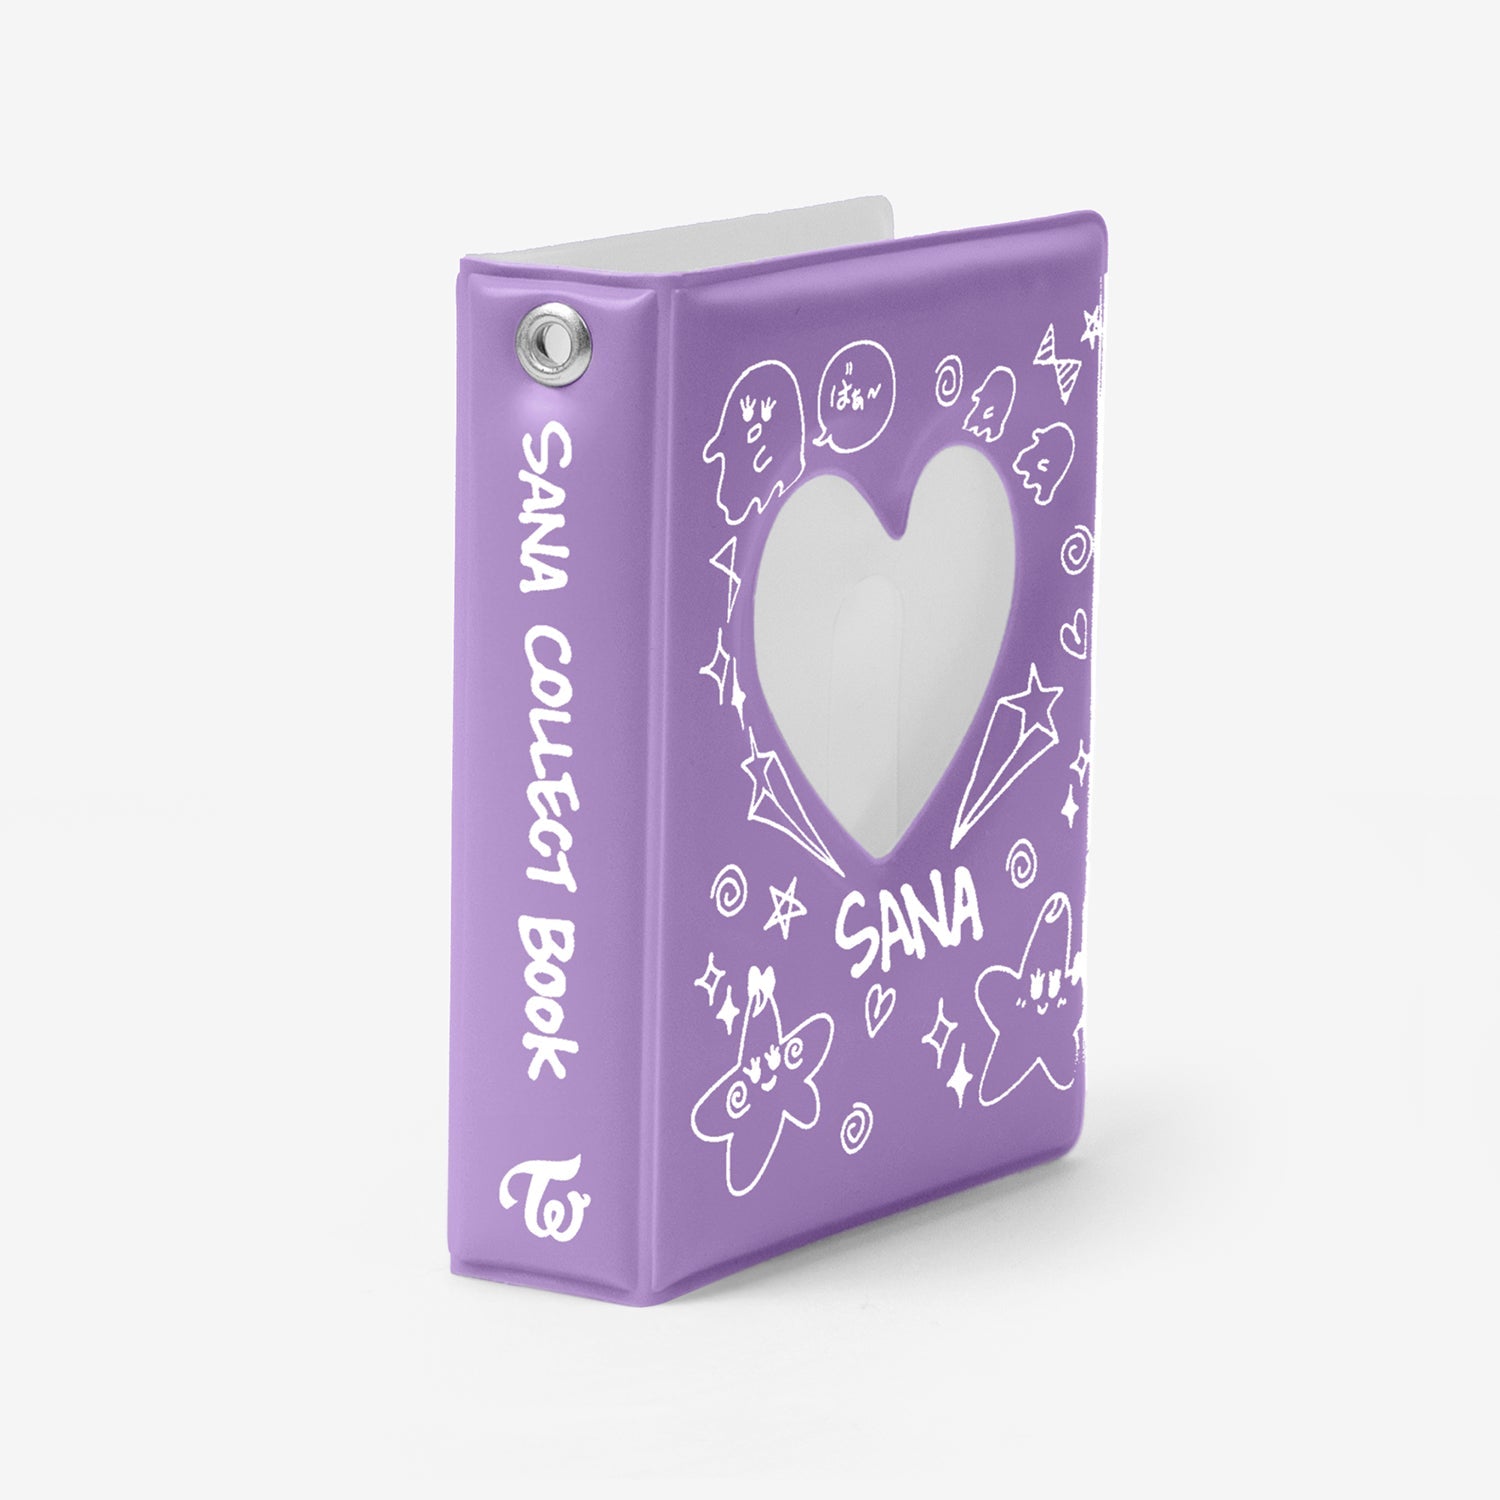 COLLECT BOOK Designed by SANA / TWICE『JAPAN DEBUT 7th Anniversary』